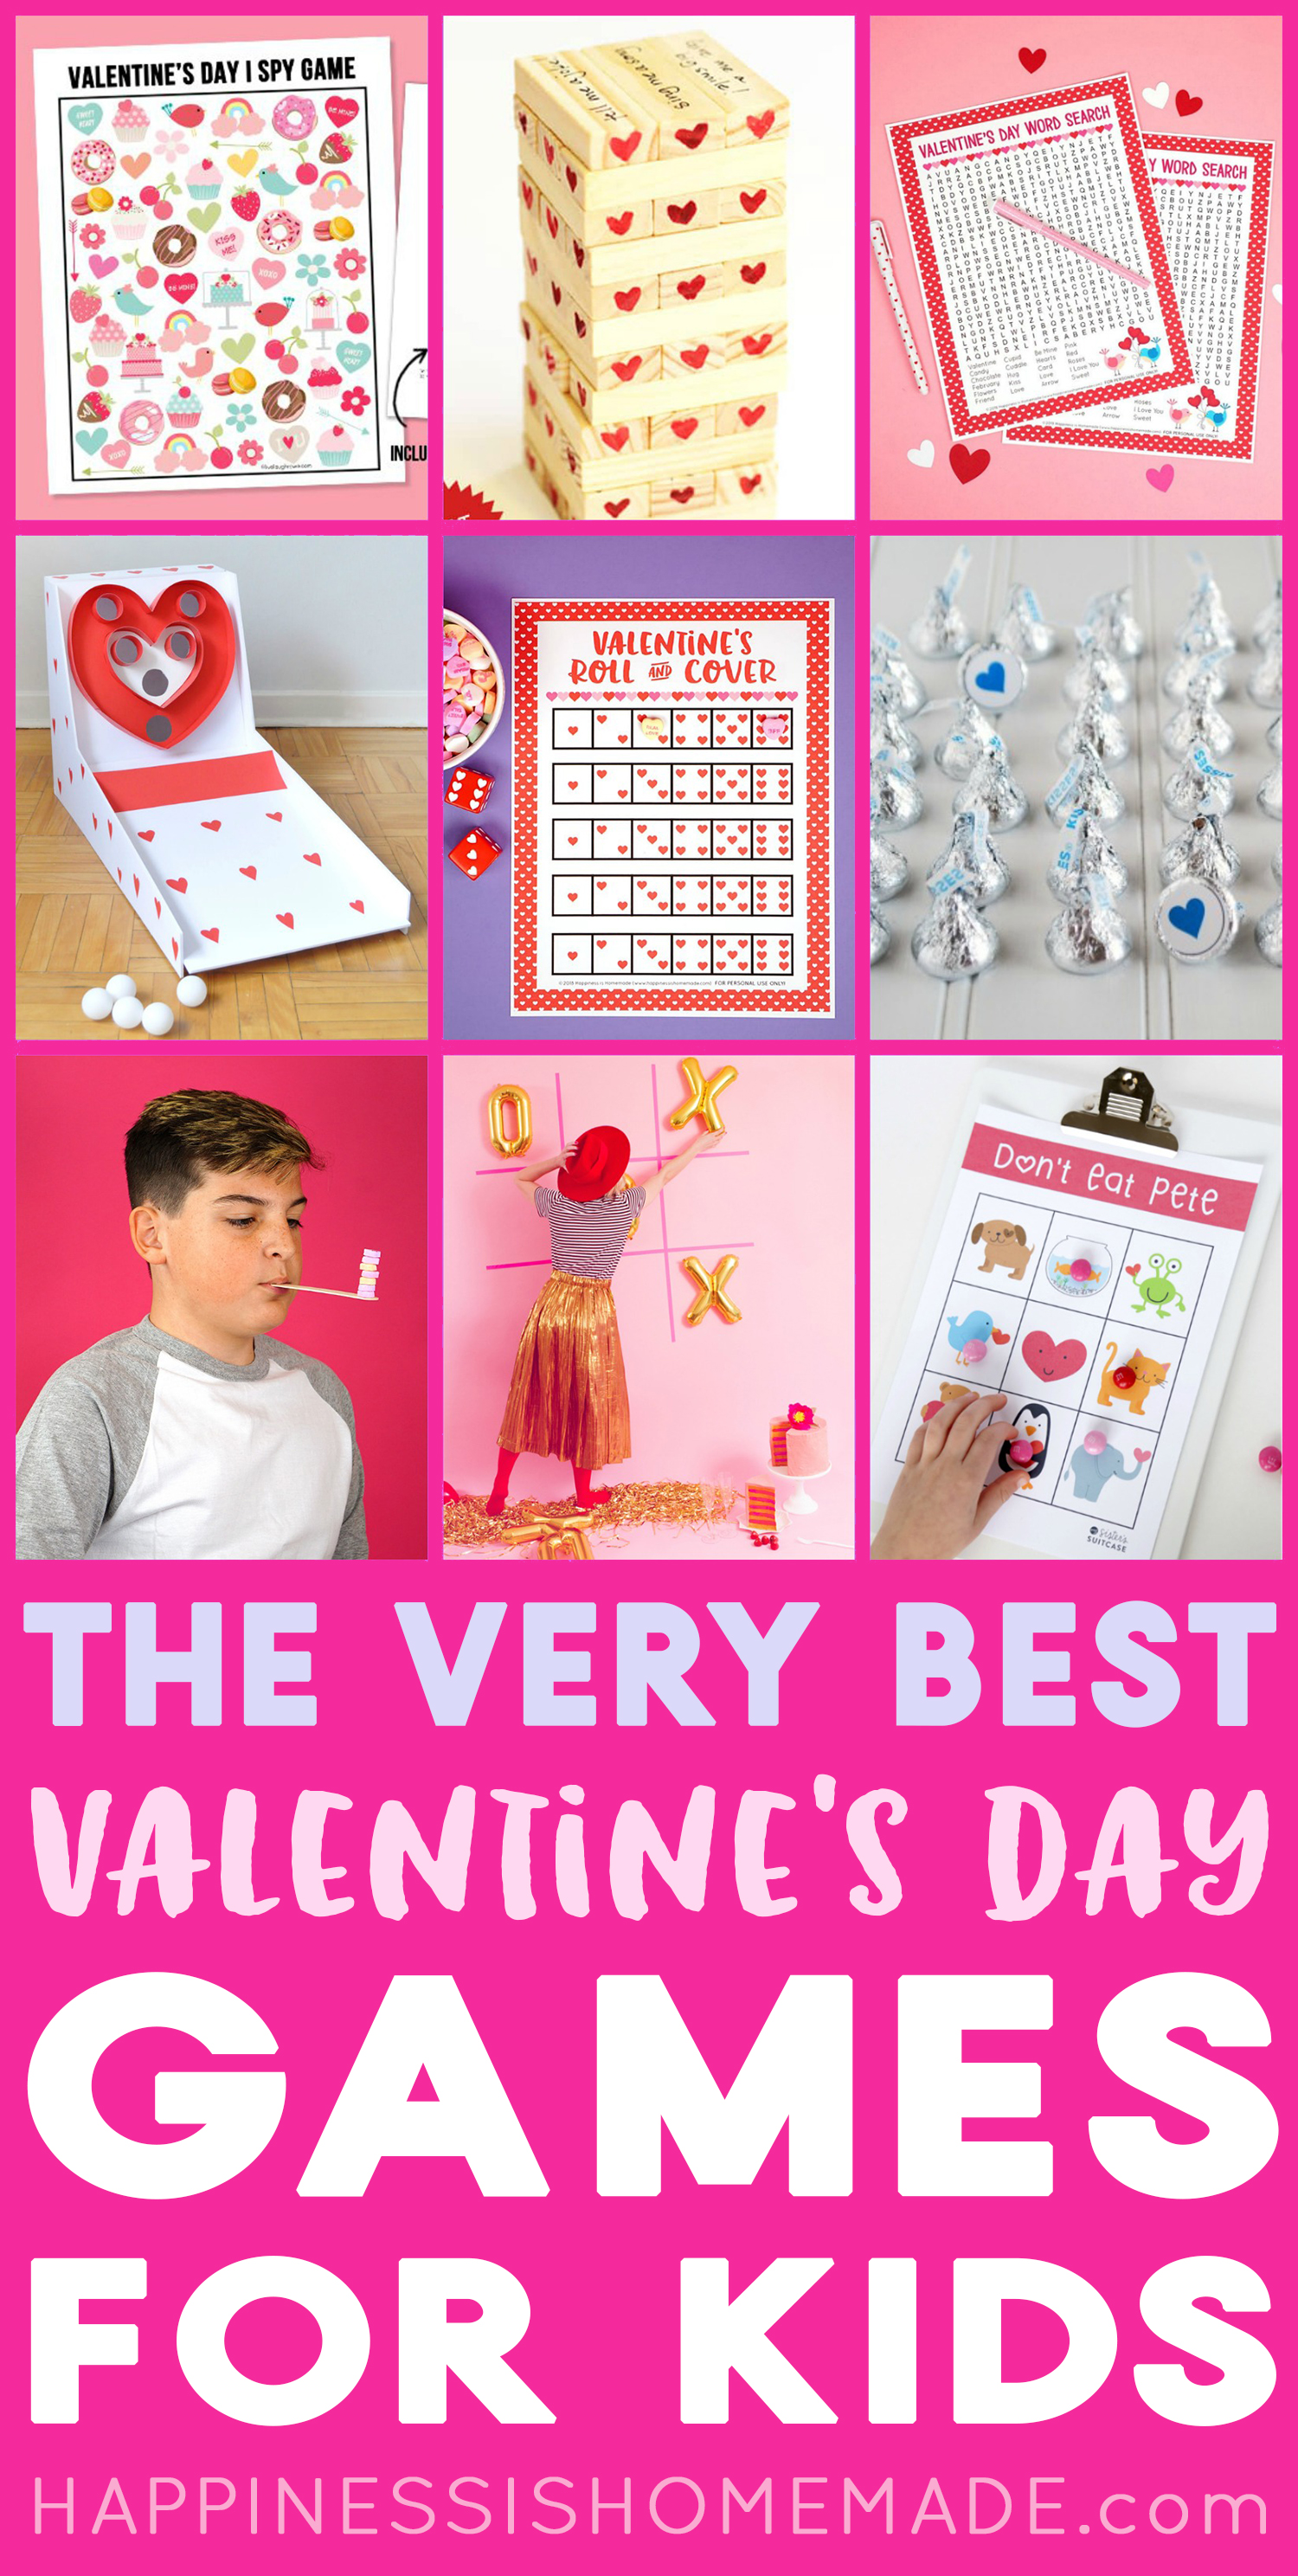 Mad Libs 16 Valentines Cards 16 Pencils Vocabulary Word Puzzles Educational